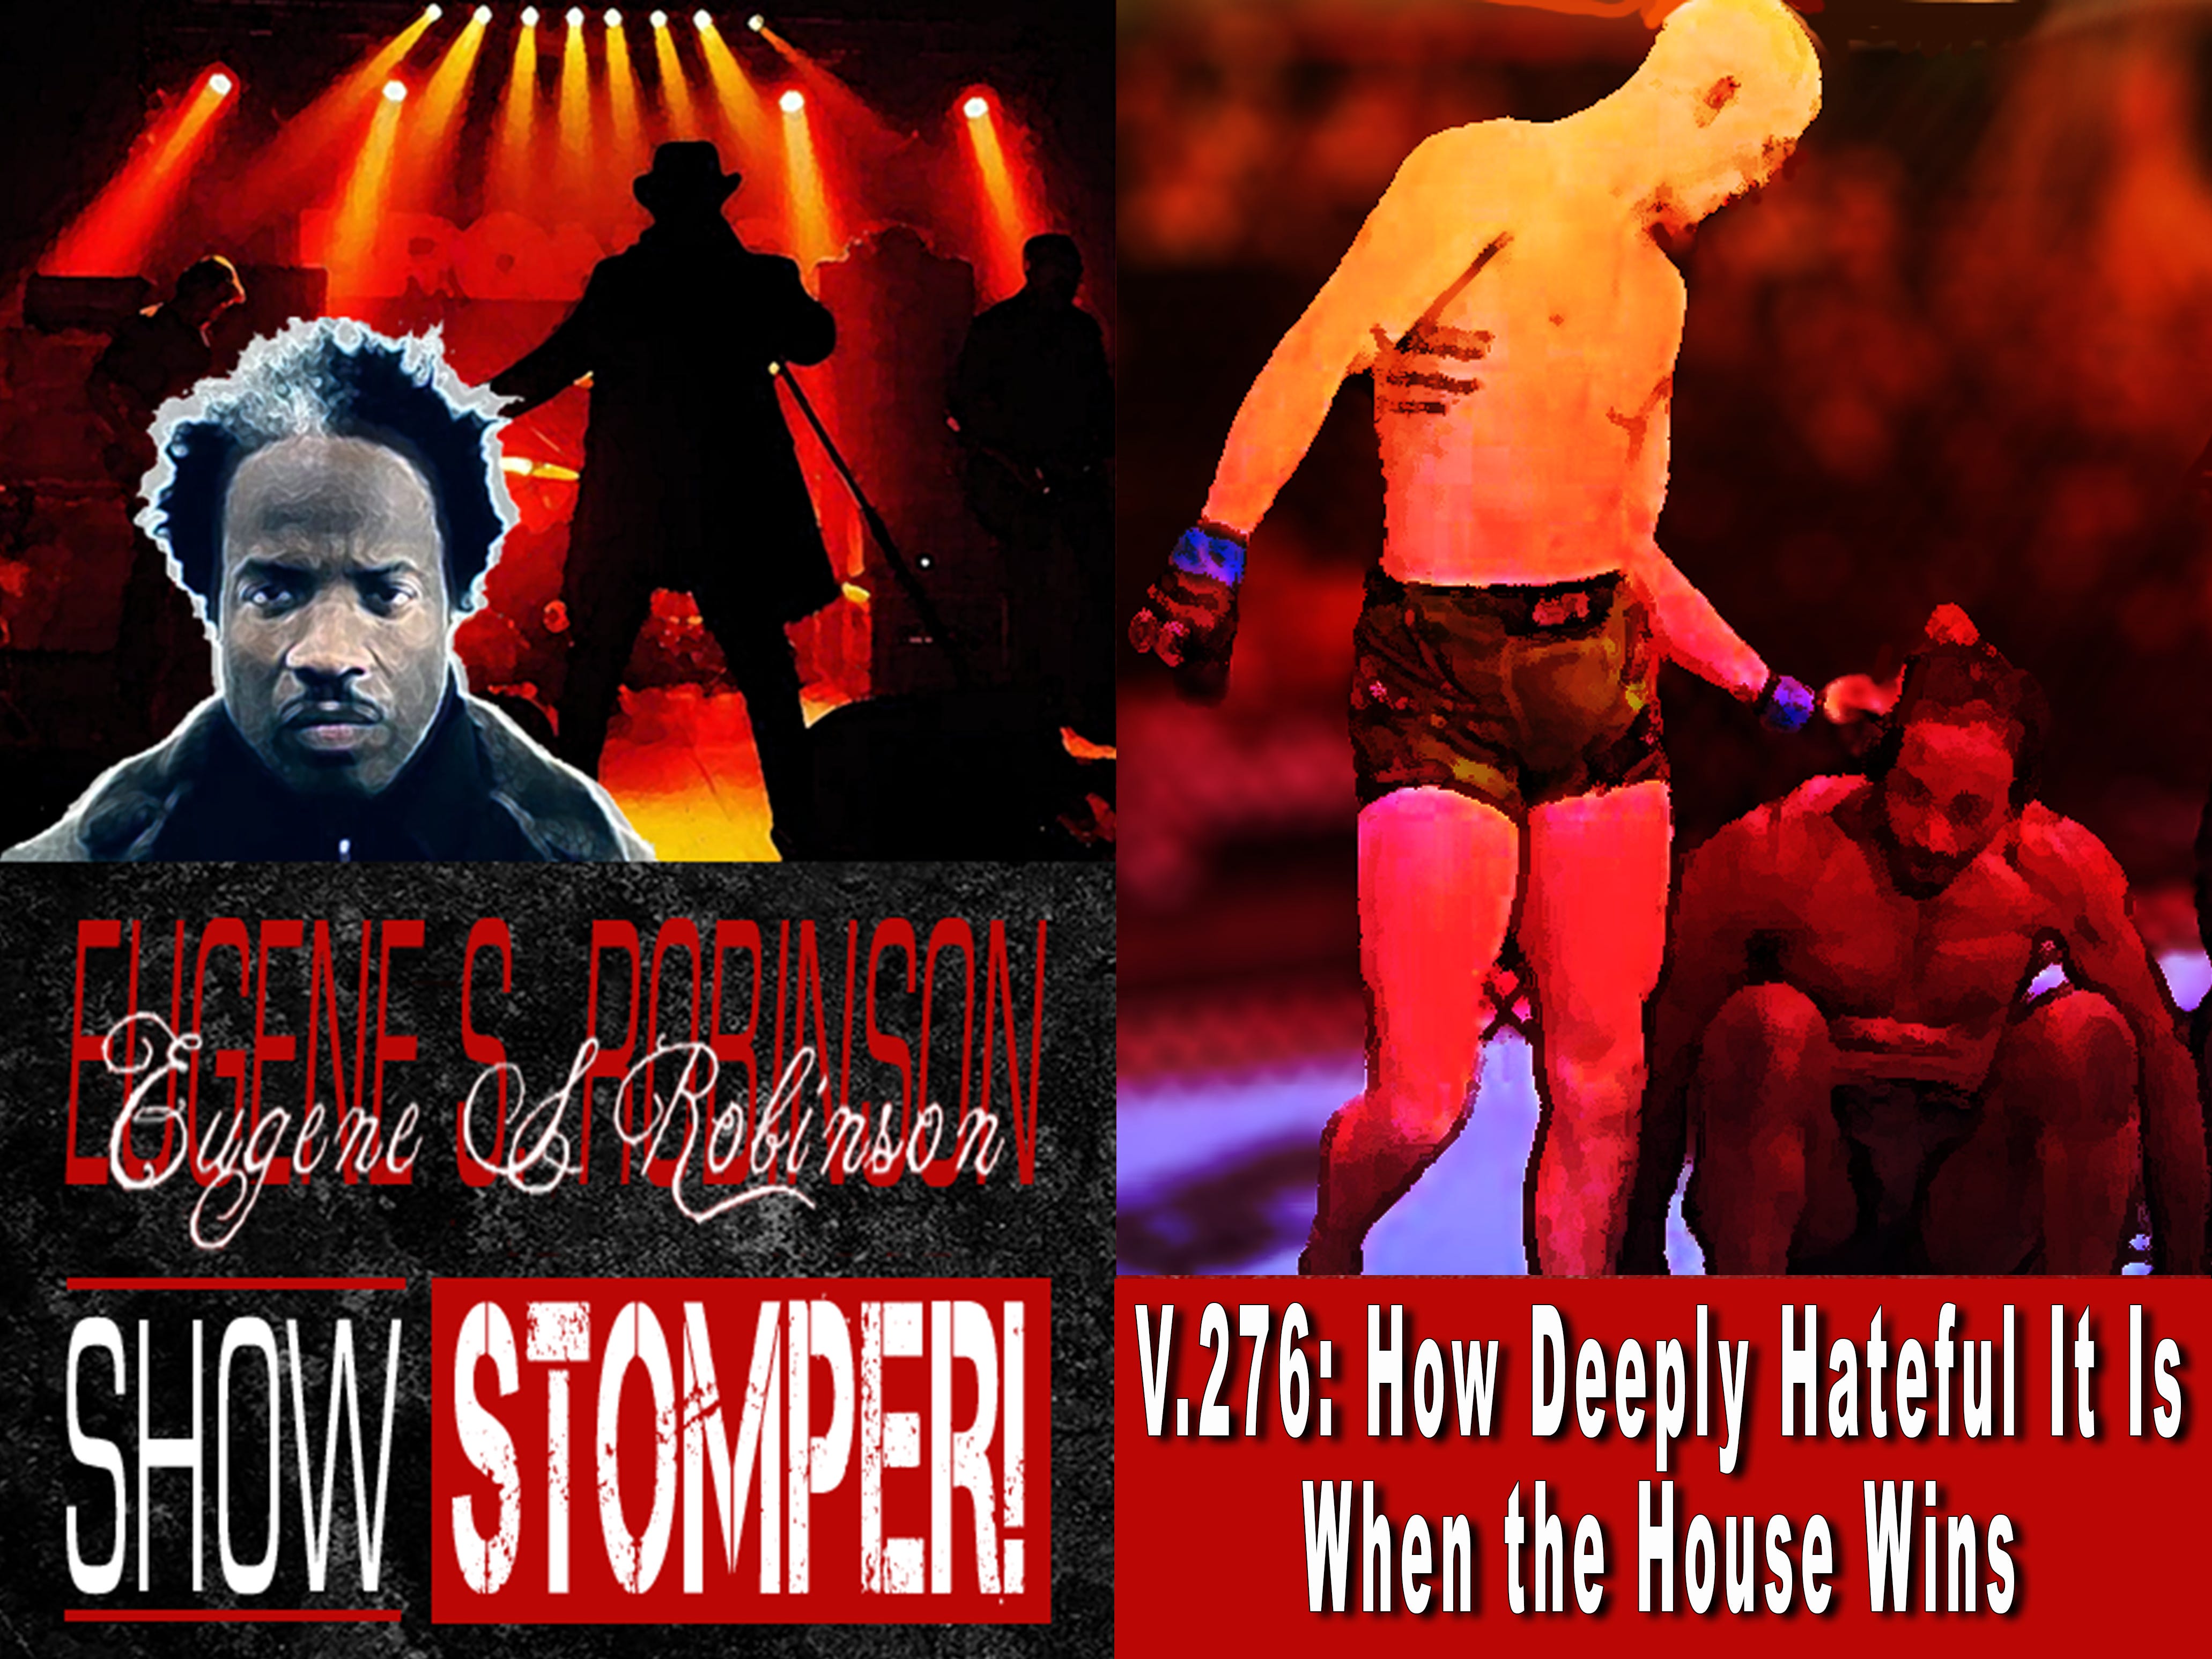 V.276: How Deeply Hateful It Is When the House Wins On The Eugene S. Robinson Show Stomper!